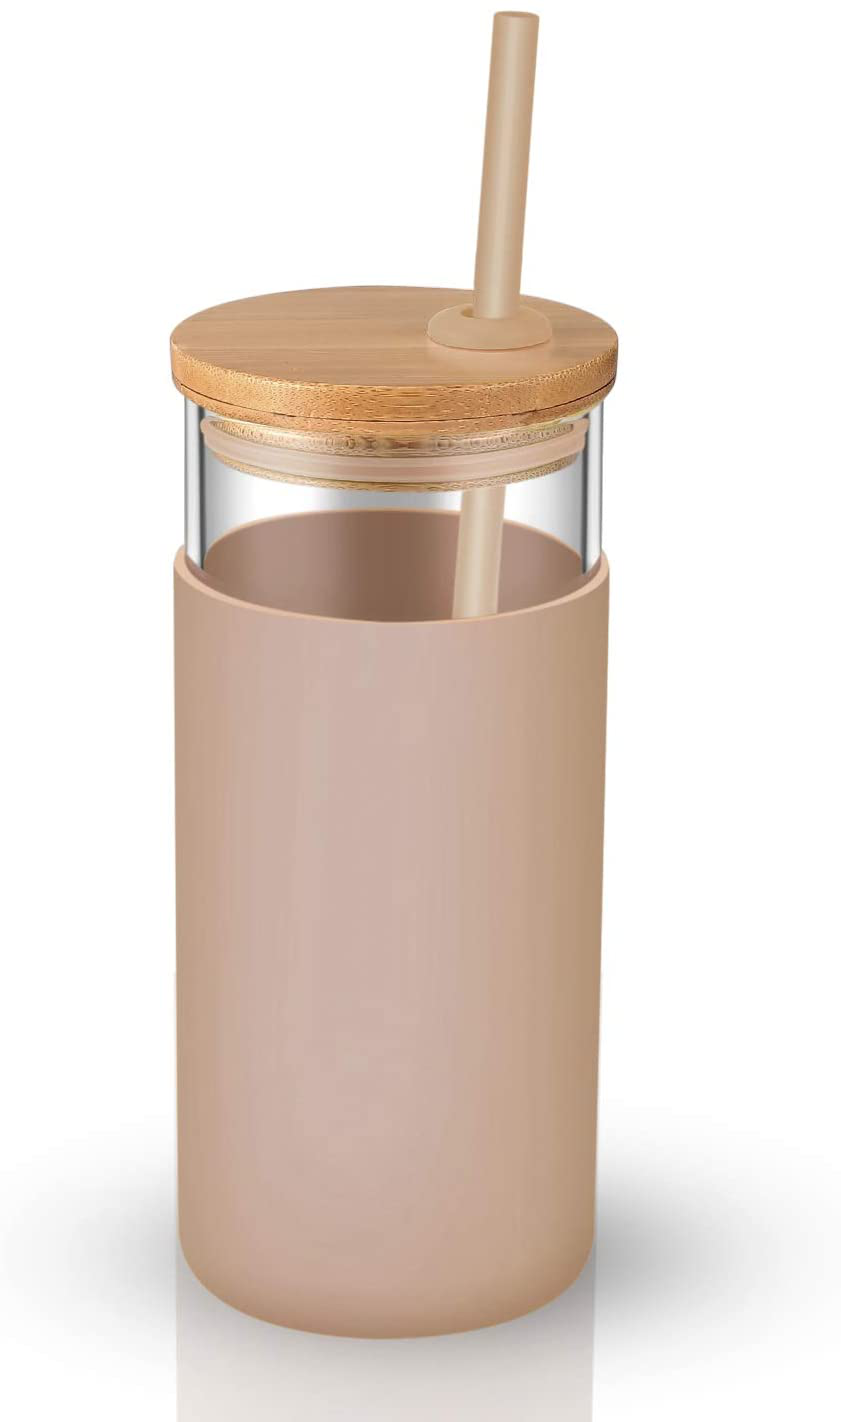 tronco 20oz Glass Tumbler Straw Silicone Protective Sleeve Bamboo Lid - BPA Free (Dot Bronze/2-Pack)